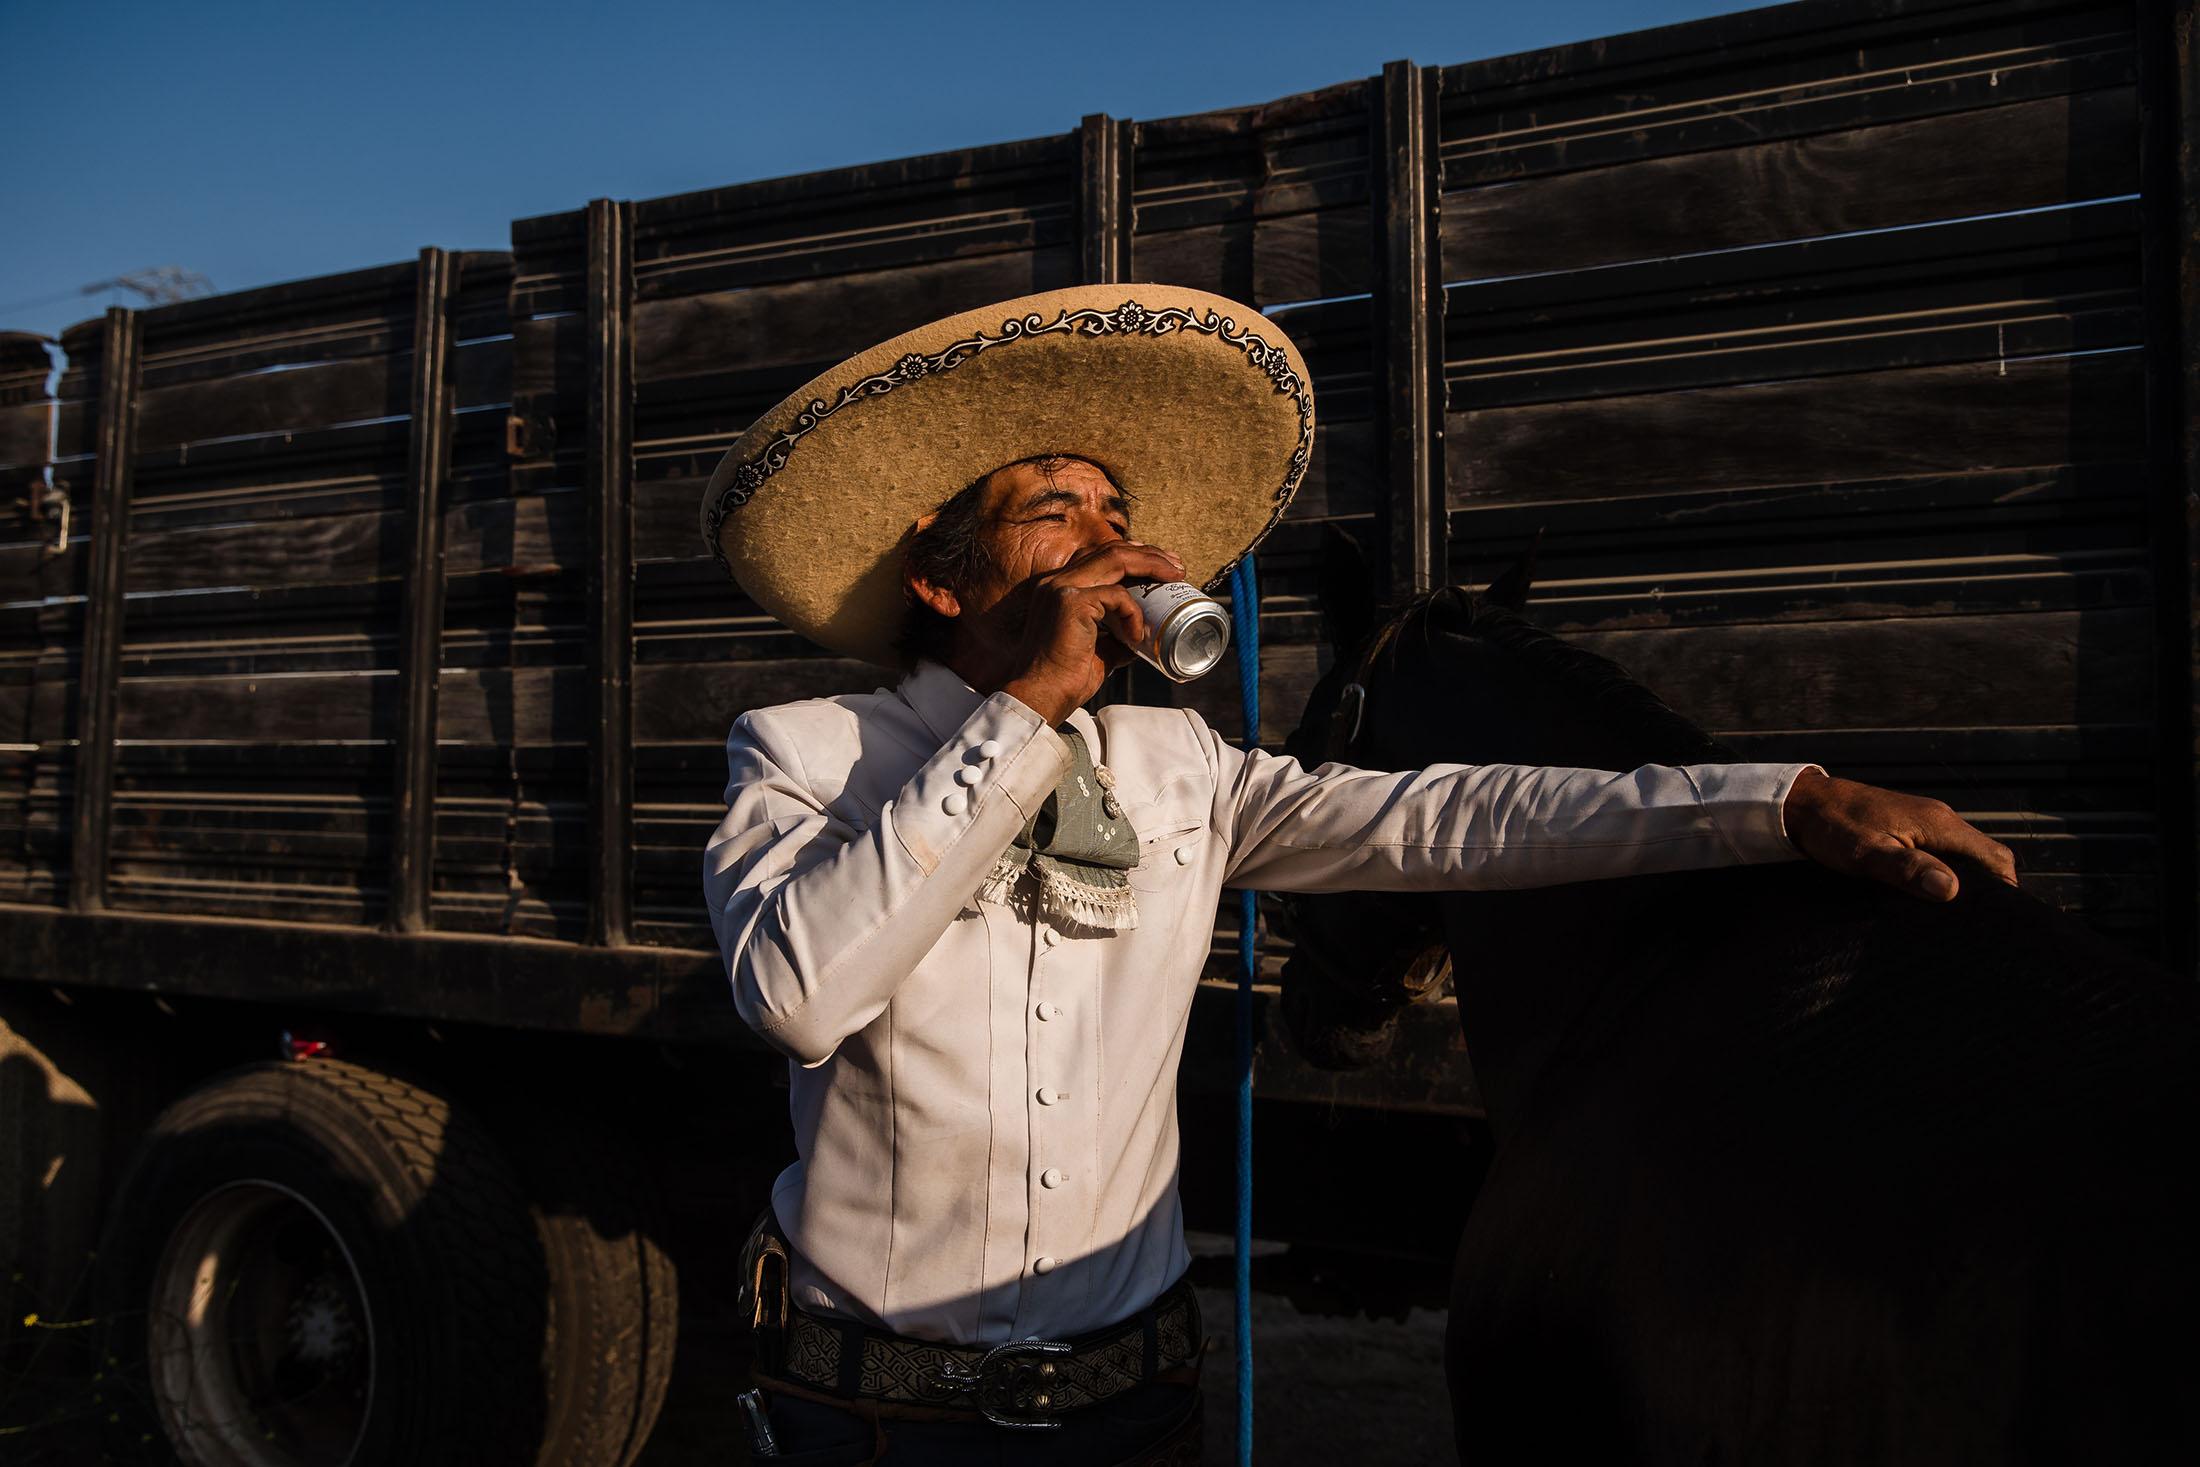 Casimiro Castillo, a member of the Charros Rancho La Laguna team drinks a beer after a charrer&iacute;a competition at Pico Rivera Sports Arena in Pico Rivera, California on July 16, 2021.